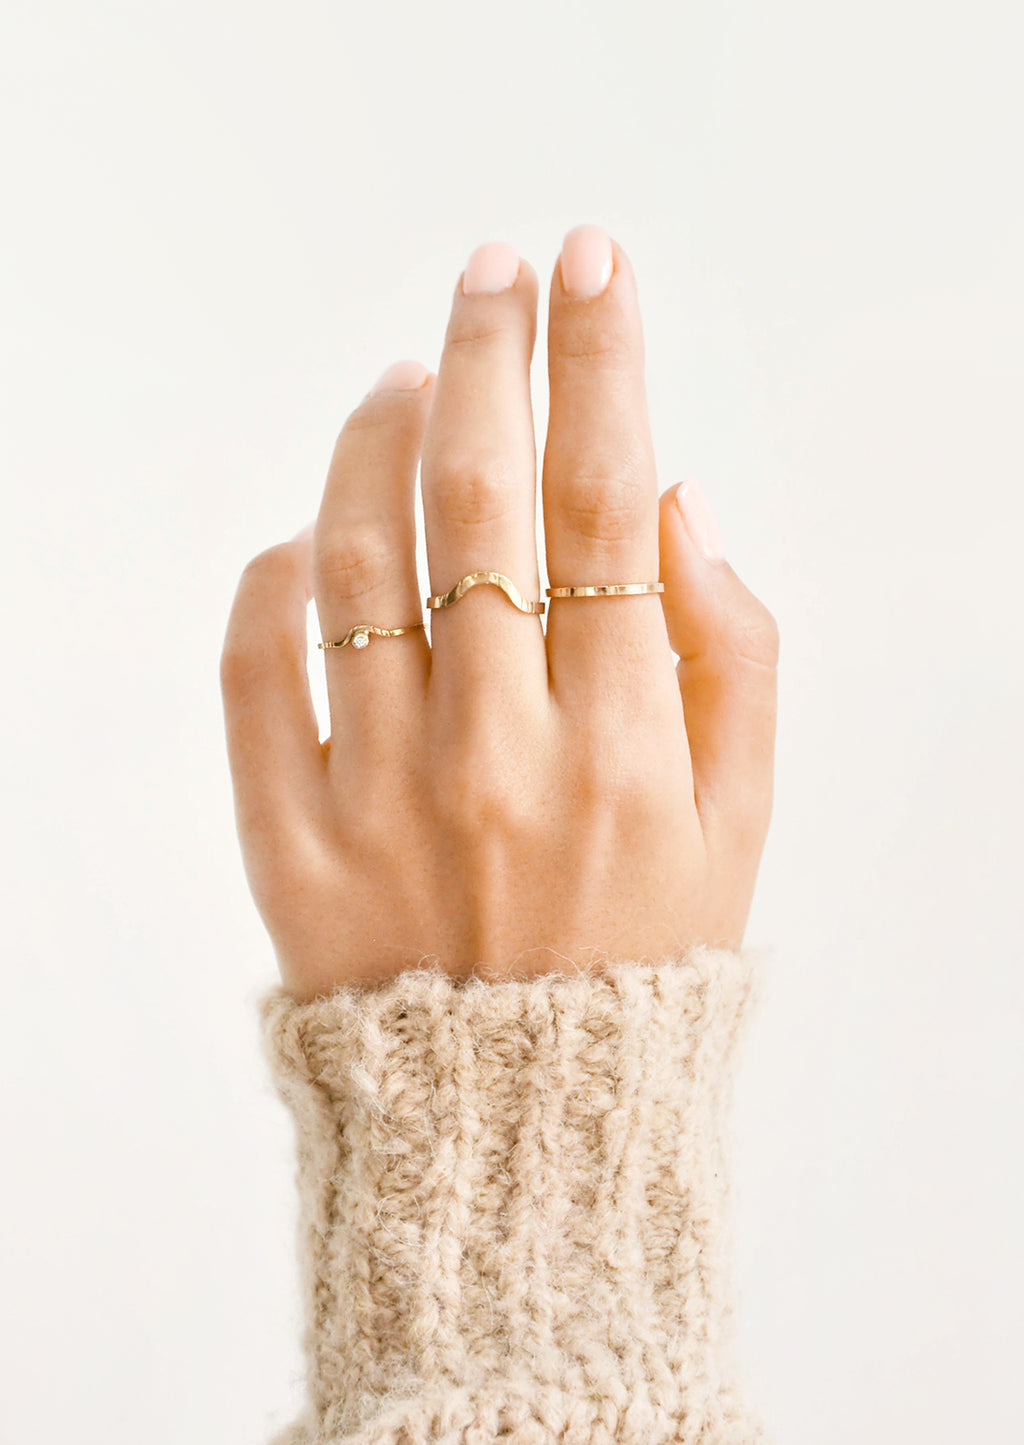 2: Model shot of hand wearing three different styles of rings.